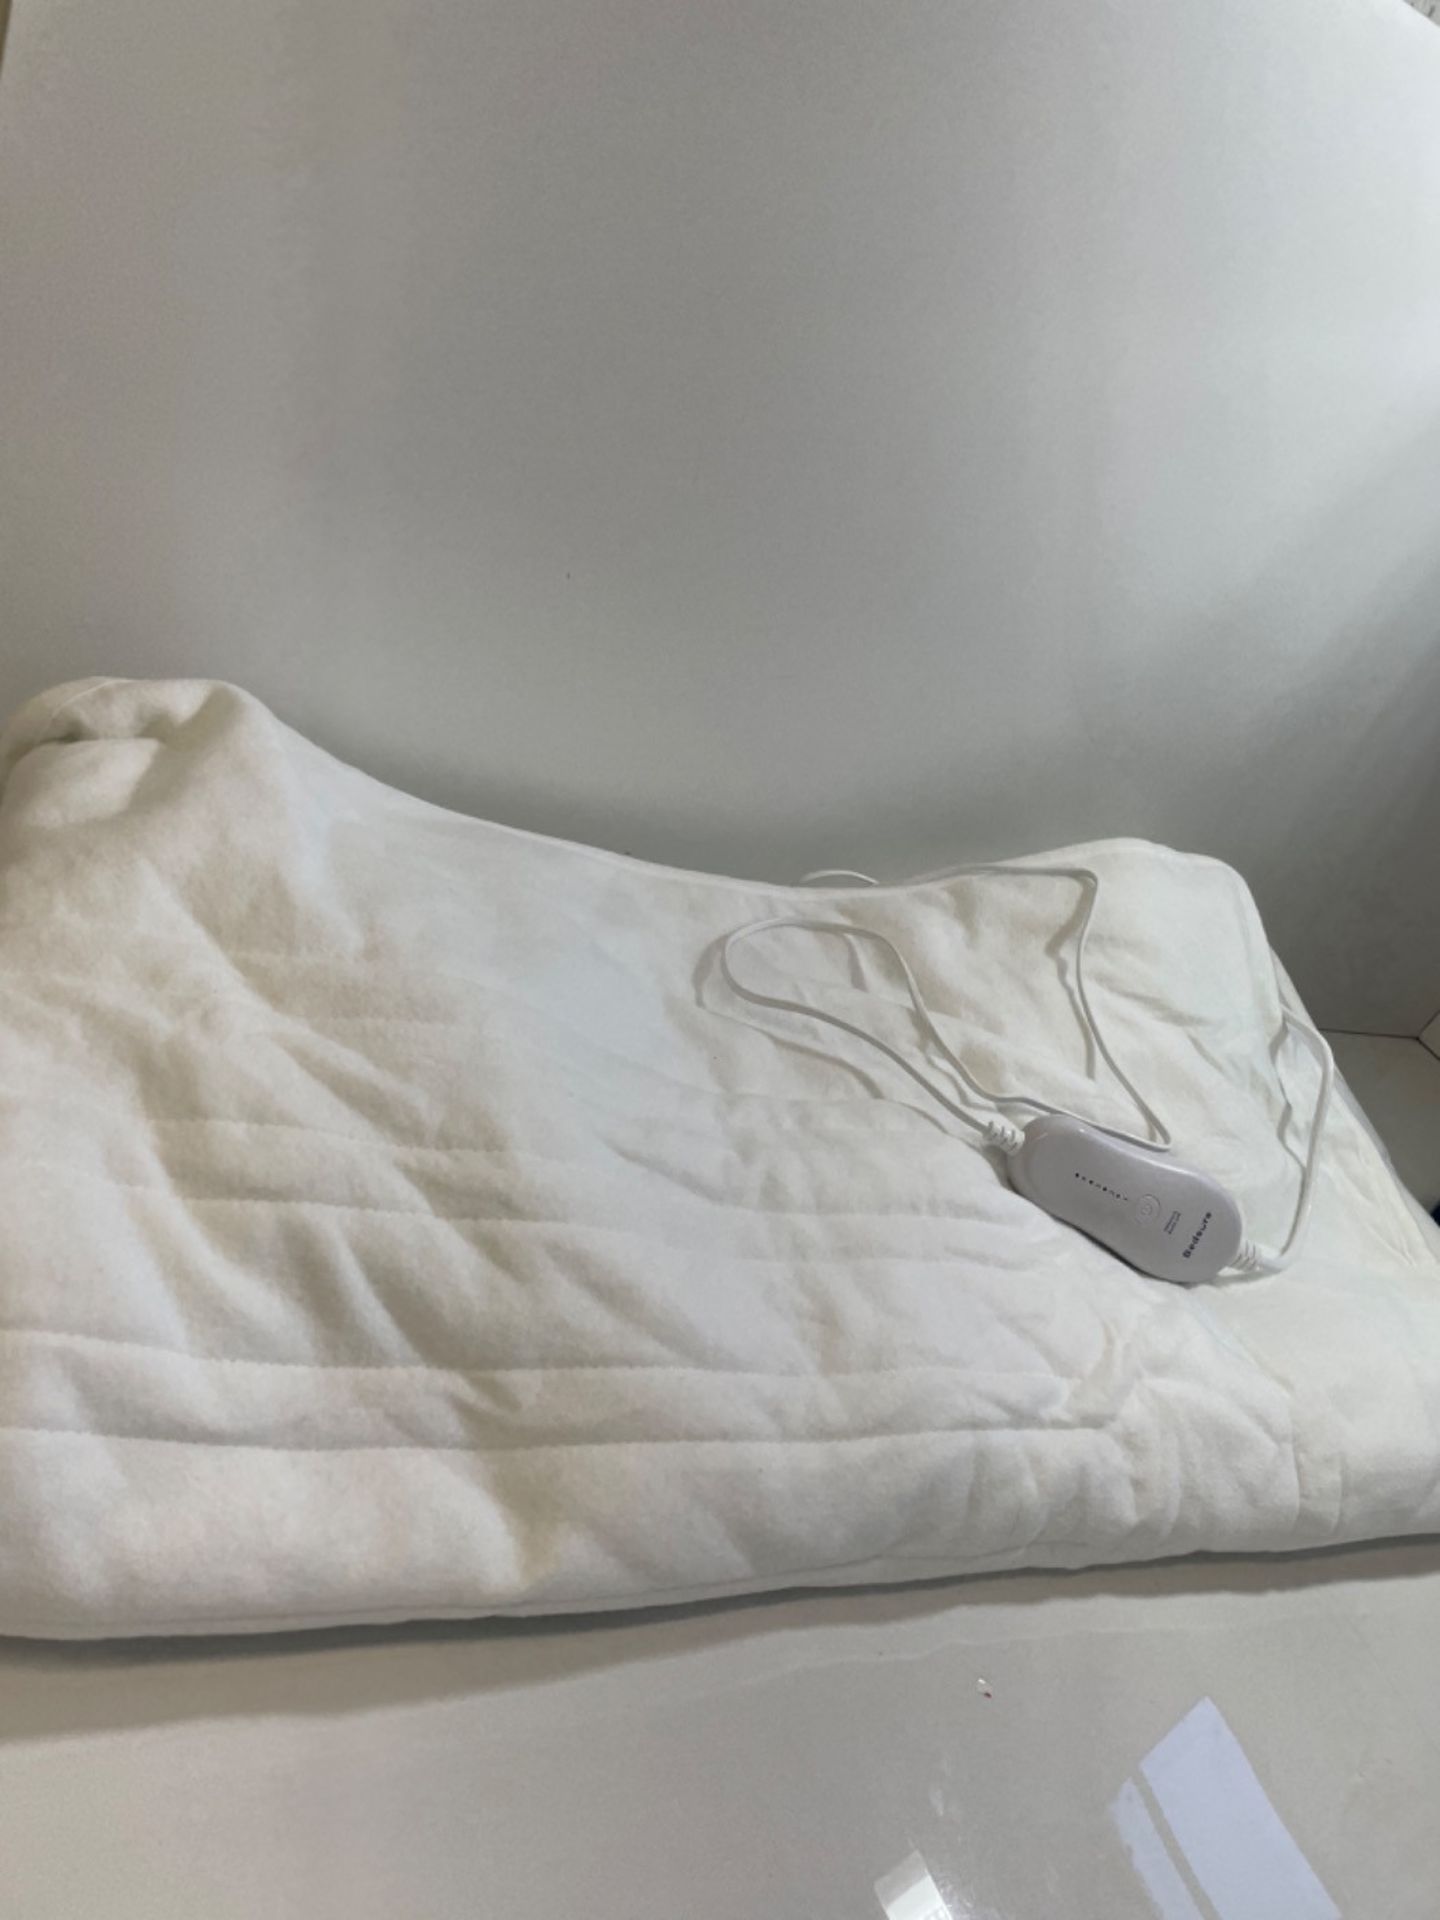 Bedsure King Size Electric Blanket With 4 Heating Levels, Heated Underblanket For Bed Warmer, Was... - Image 2 of 3